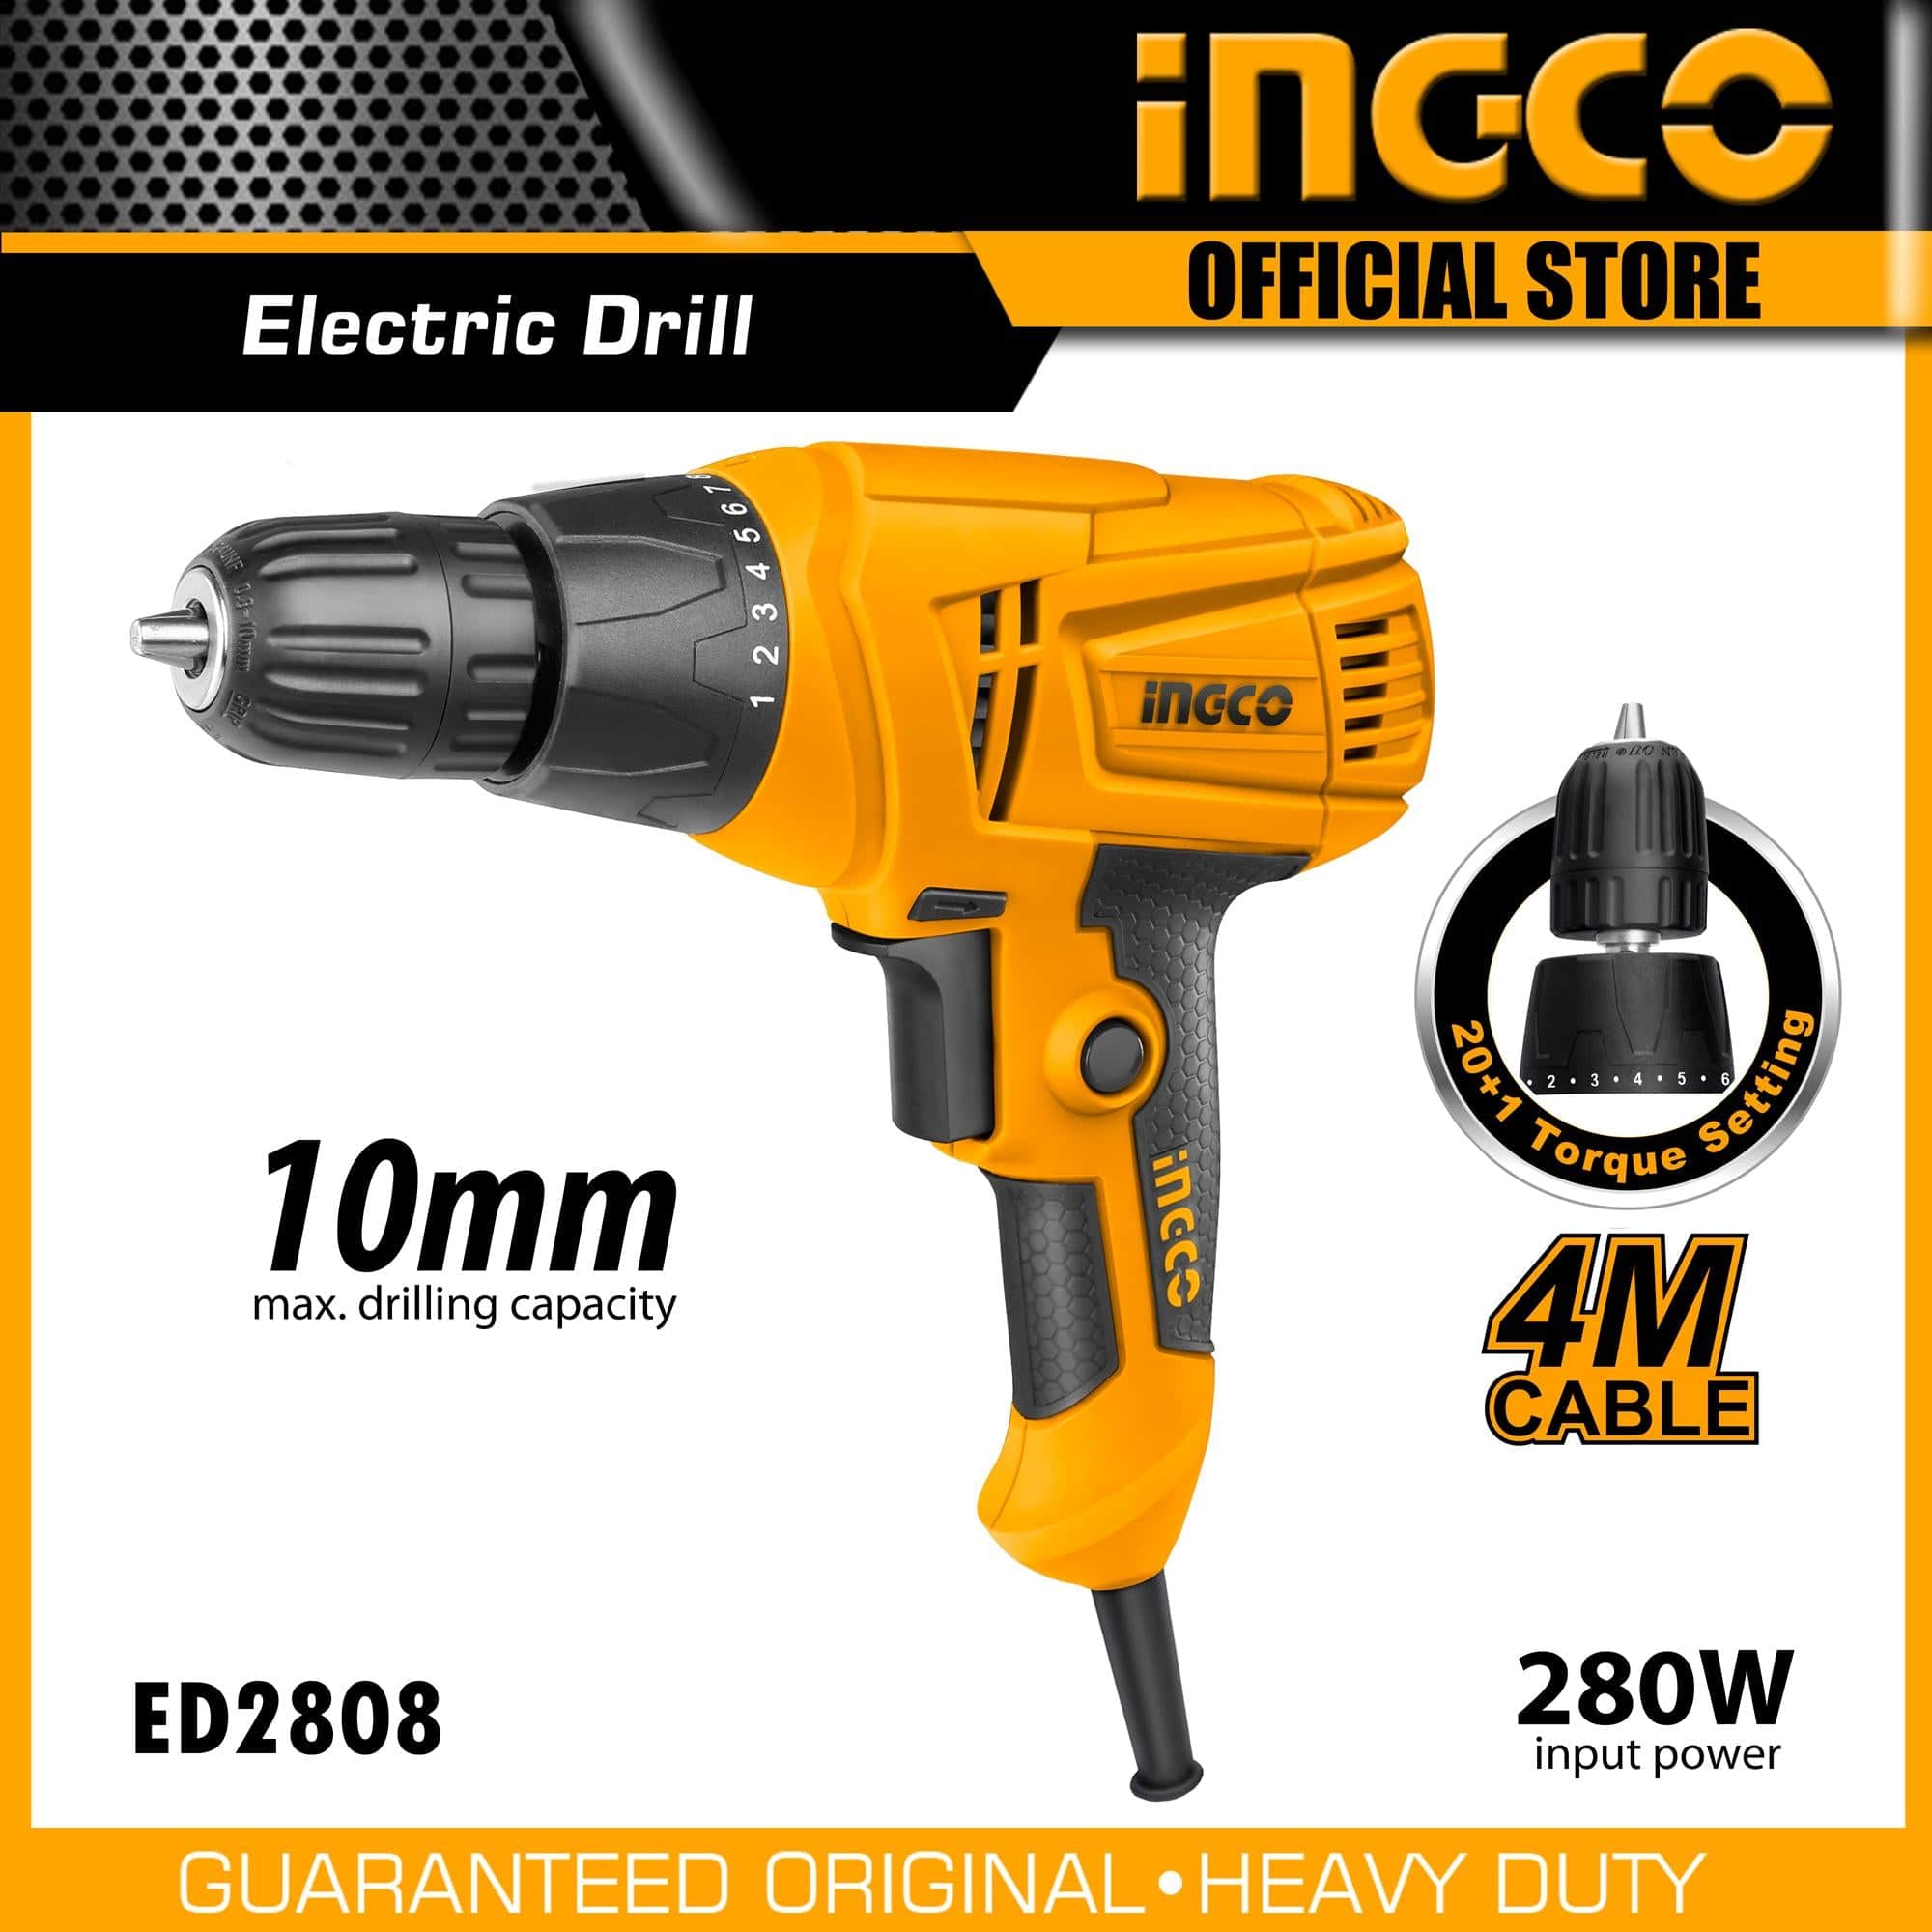 Ingco Electric Drill 280W - ED2808 - Buy Online in Accra, Ghana at Supply Master Drill Buy Tools hardware Building materials